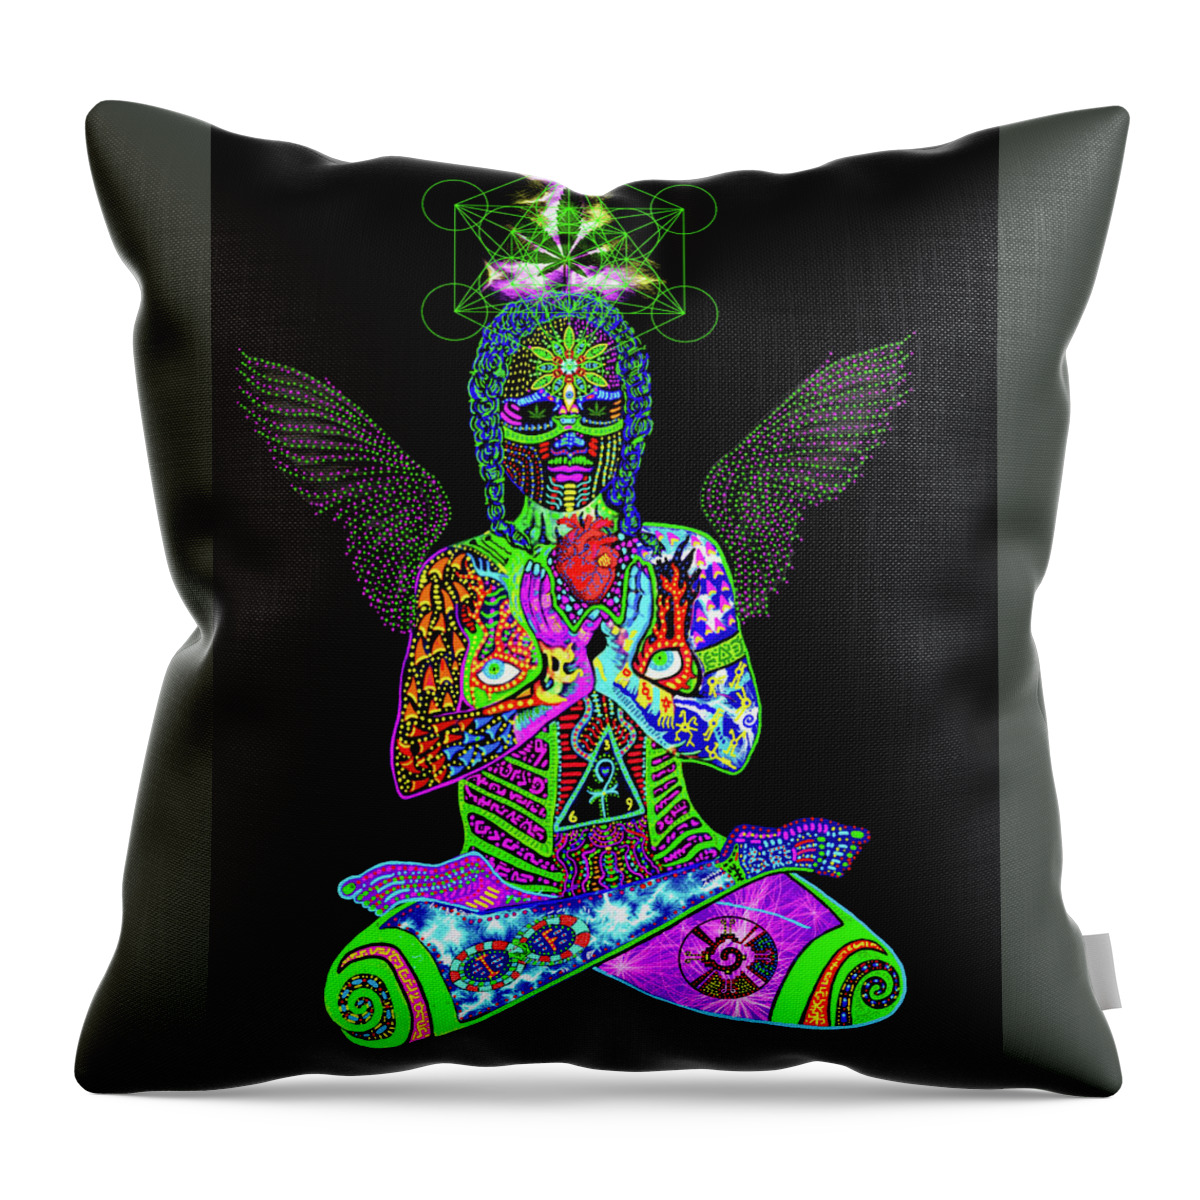 Visionary Art Throw Pillow featuring the mixed media Transurfing Intelligence by Myztico Campo